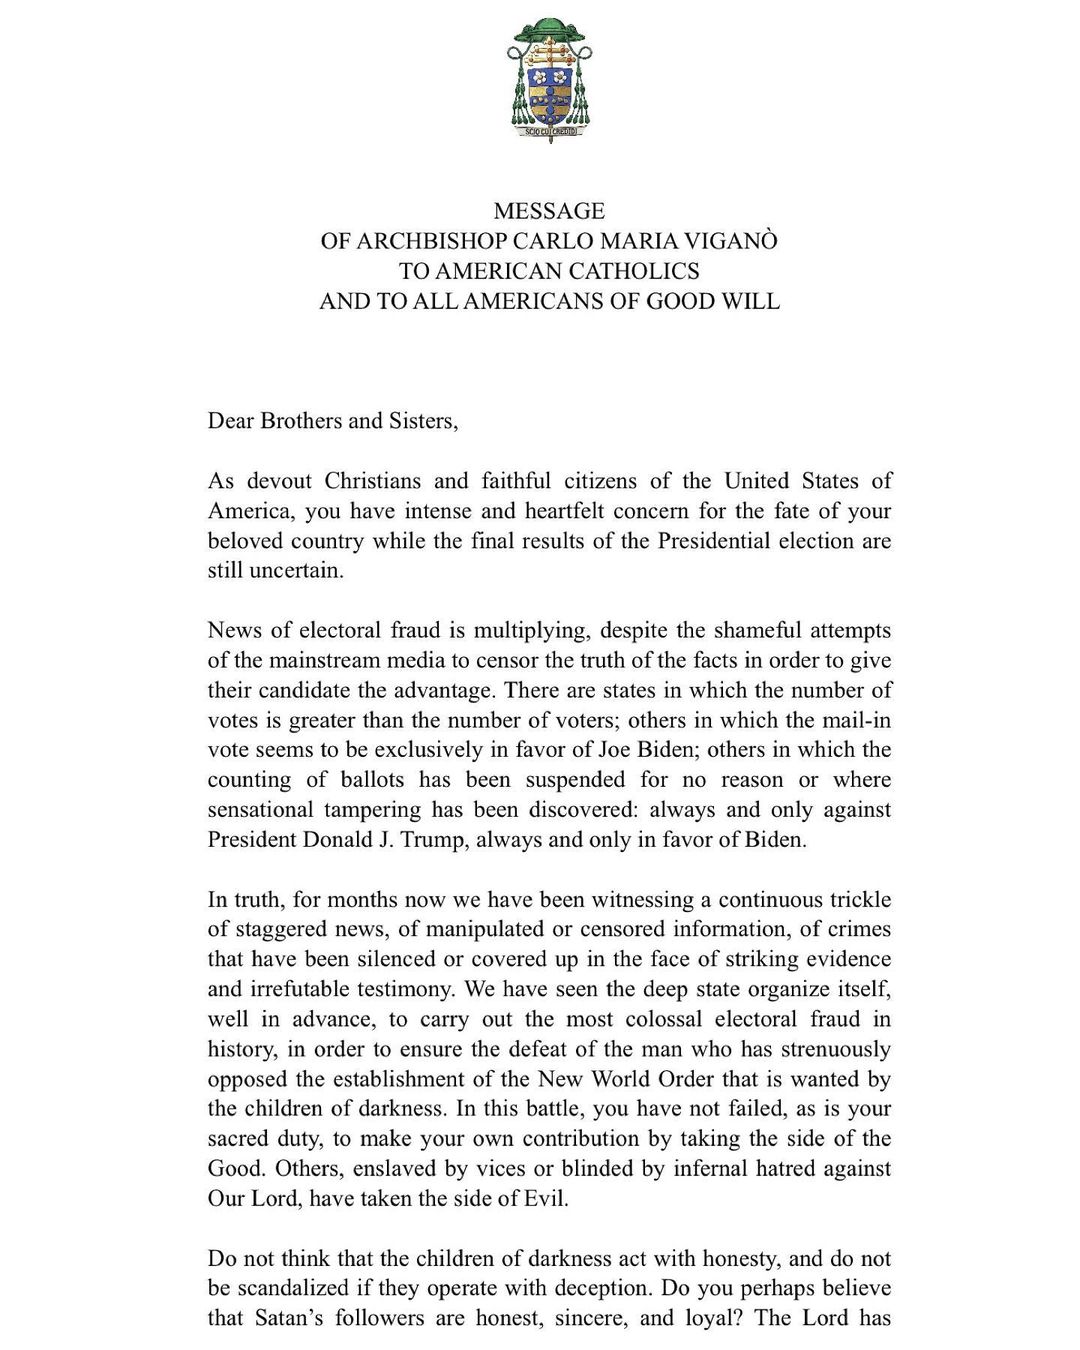 archbishop-vigano-letter-aletters-one